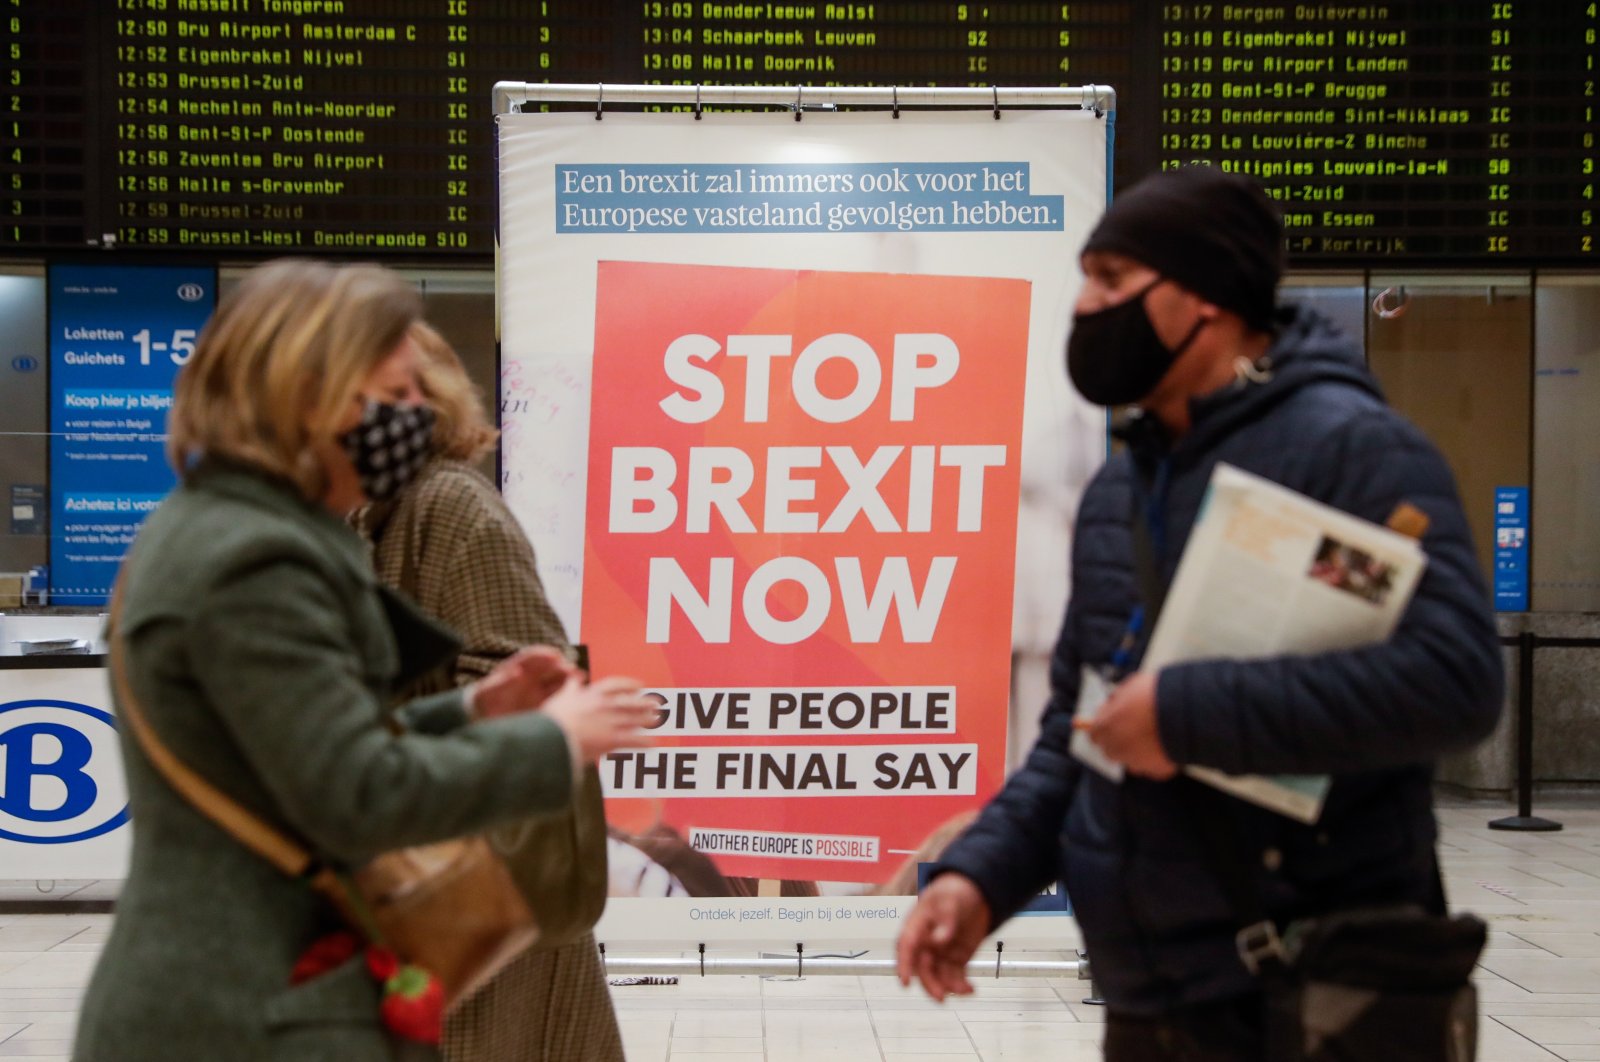 Commuters pass an anti-Brexit billboard made by the KU Leuven University at the Central Station in Brussels, Belgium on Dec. 17, 2020. (EPA Photo)